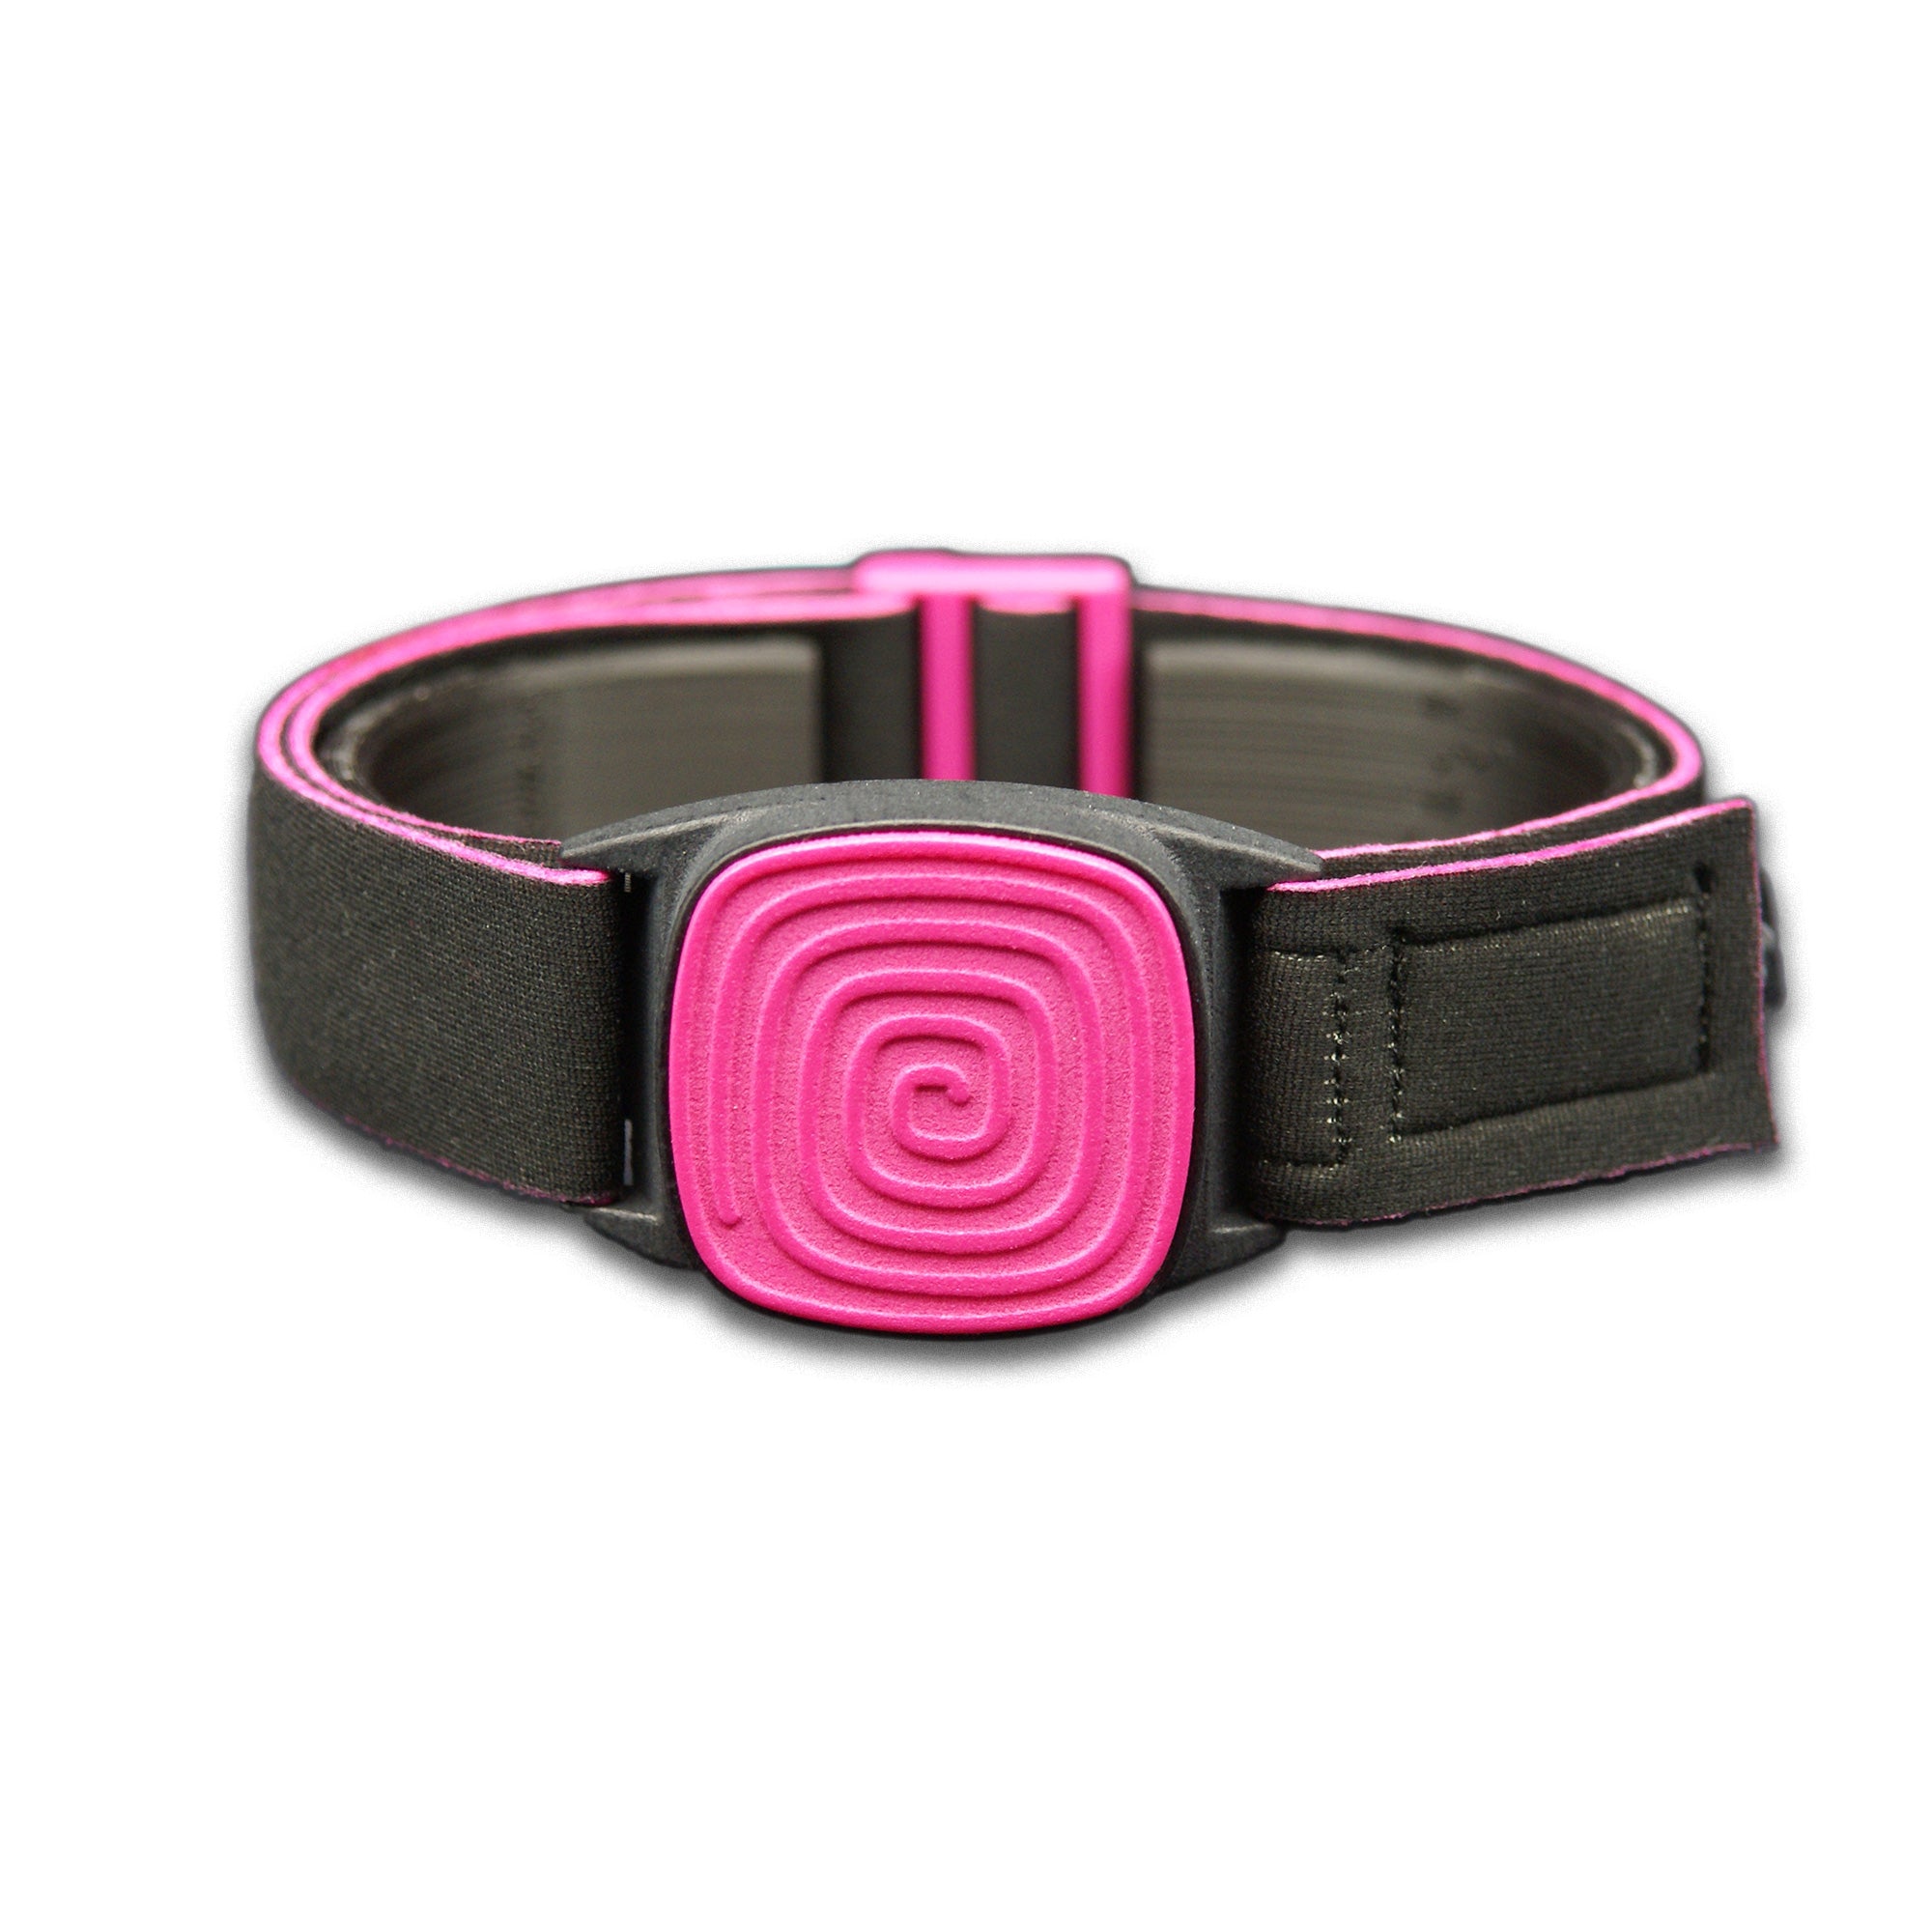 Libreband+ armband for Blucon. Magenta cover with Swirl design. 